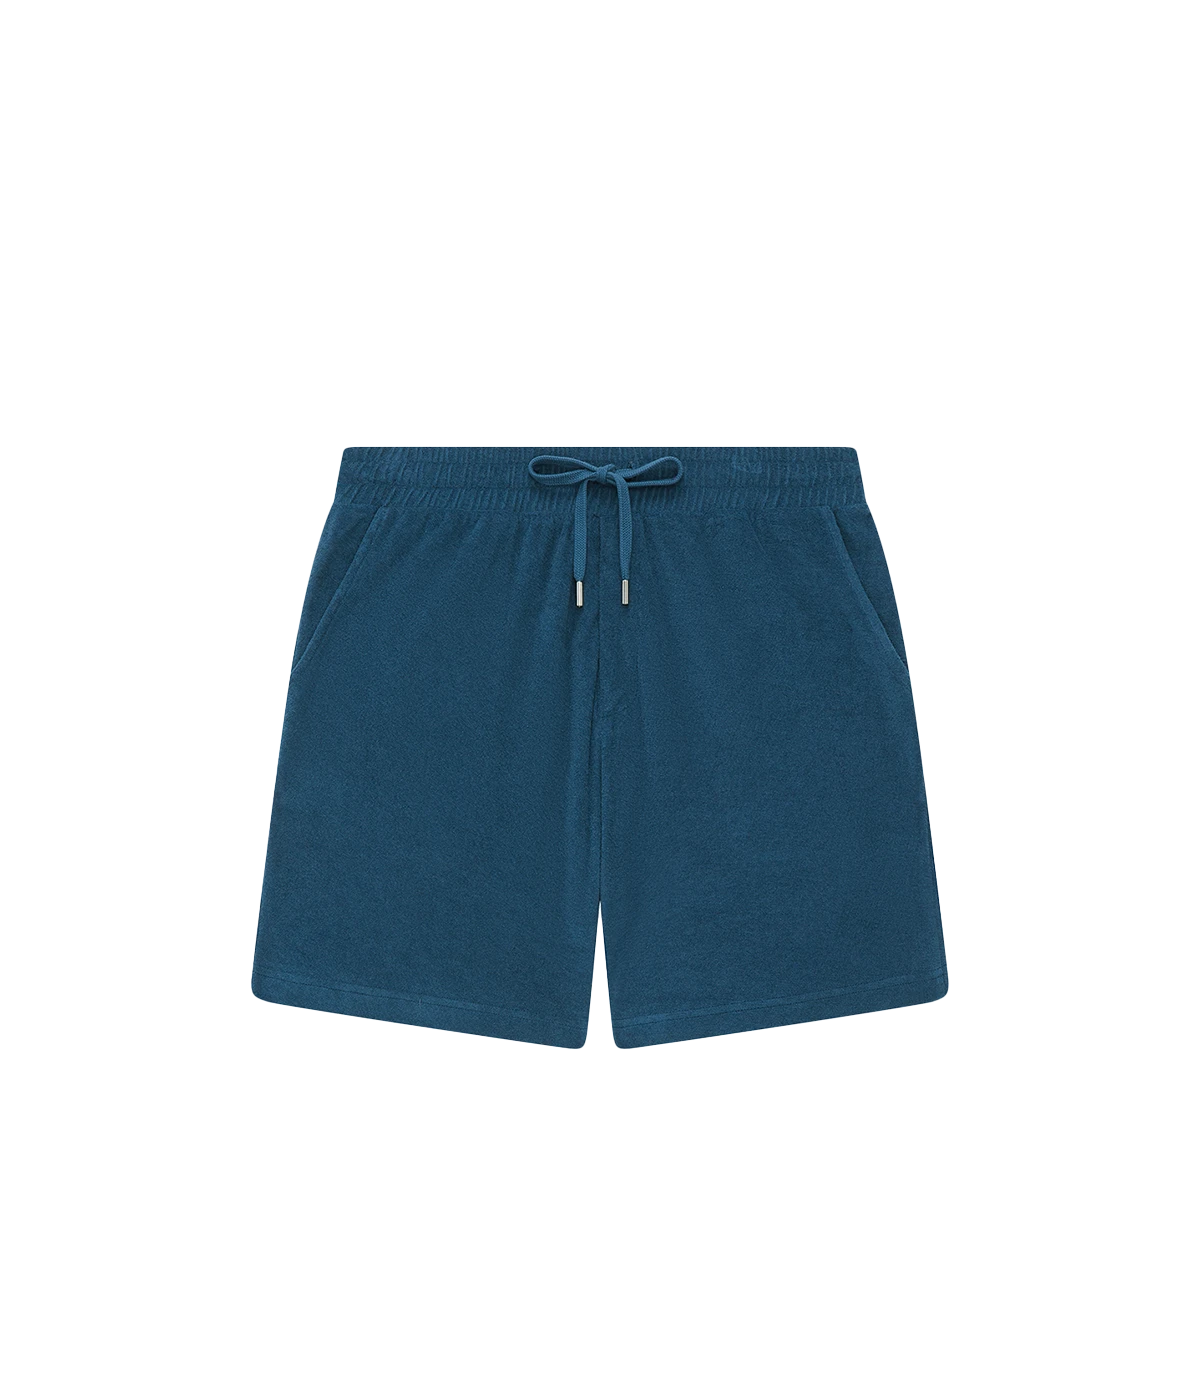 Relaxed fit terry cotton shorts by Frescobol Carioca, perfect wash and wear loungewear.